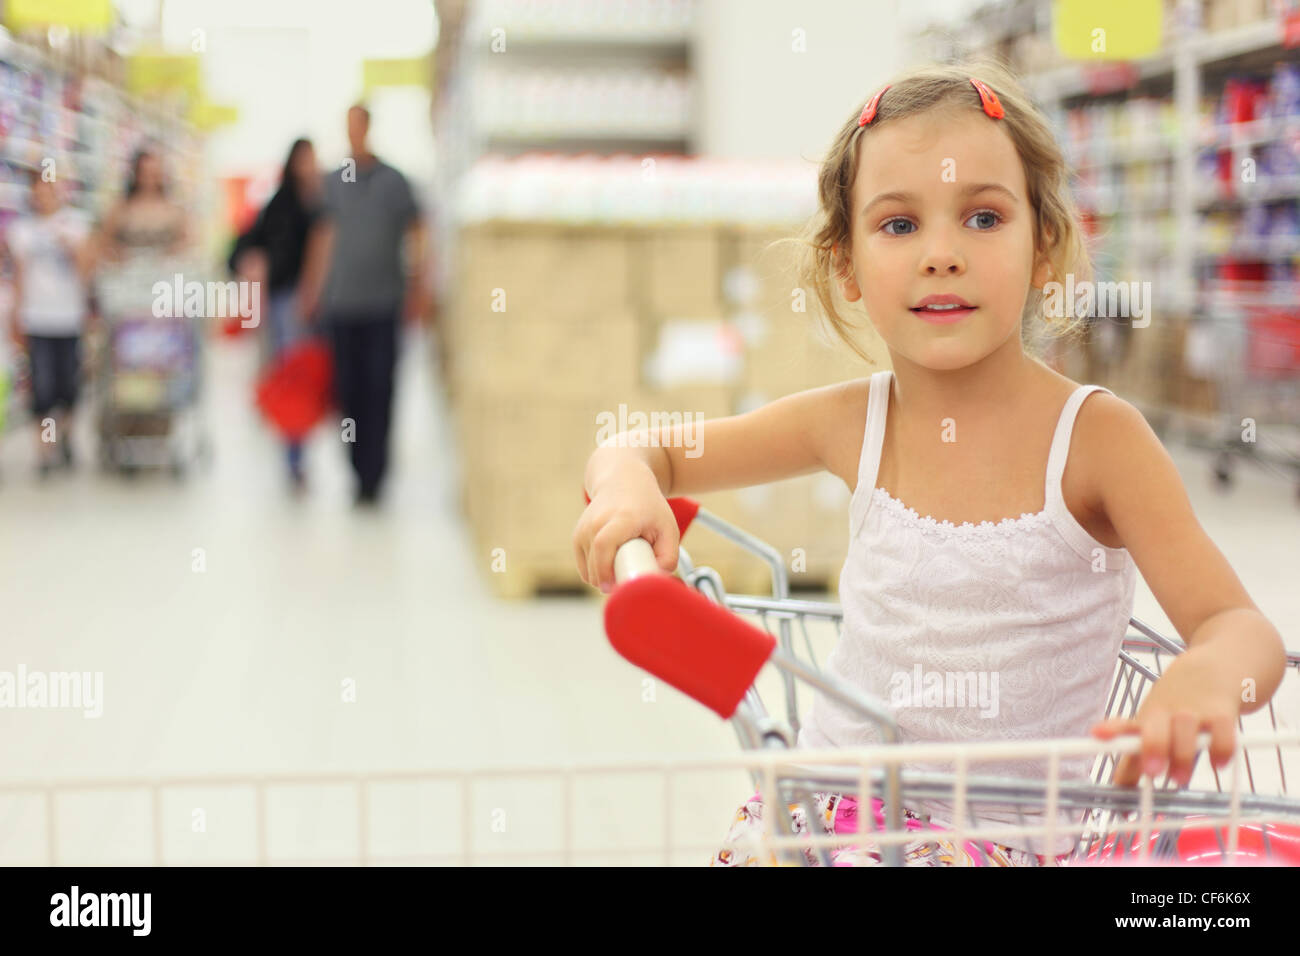 little girl sitting in store cart and looking at side, shelves with commodity Stock Photo